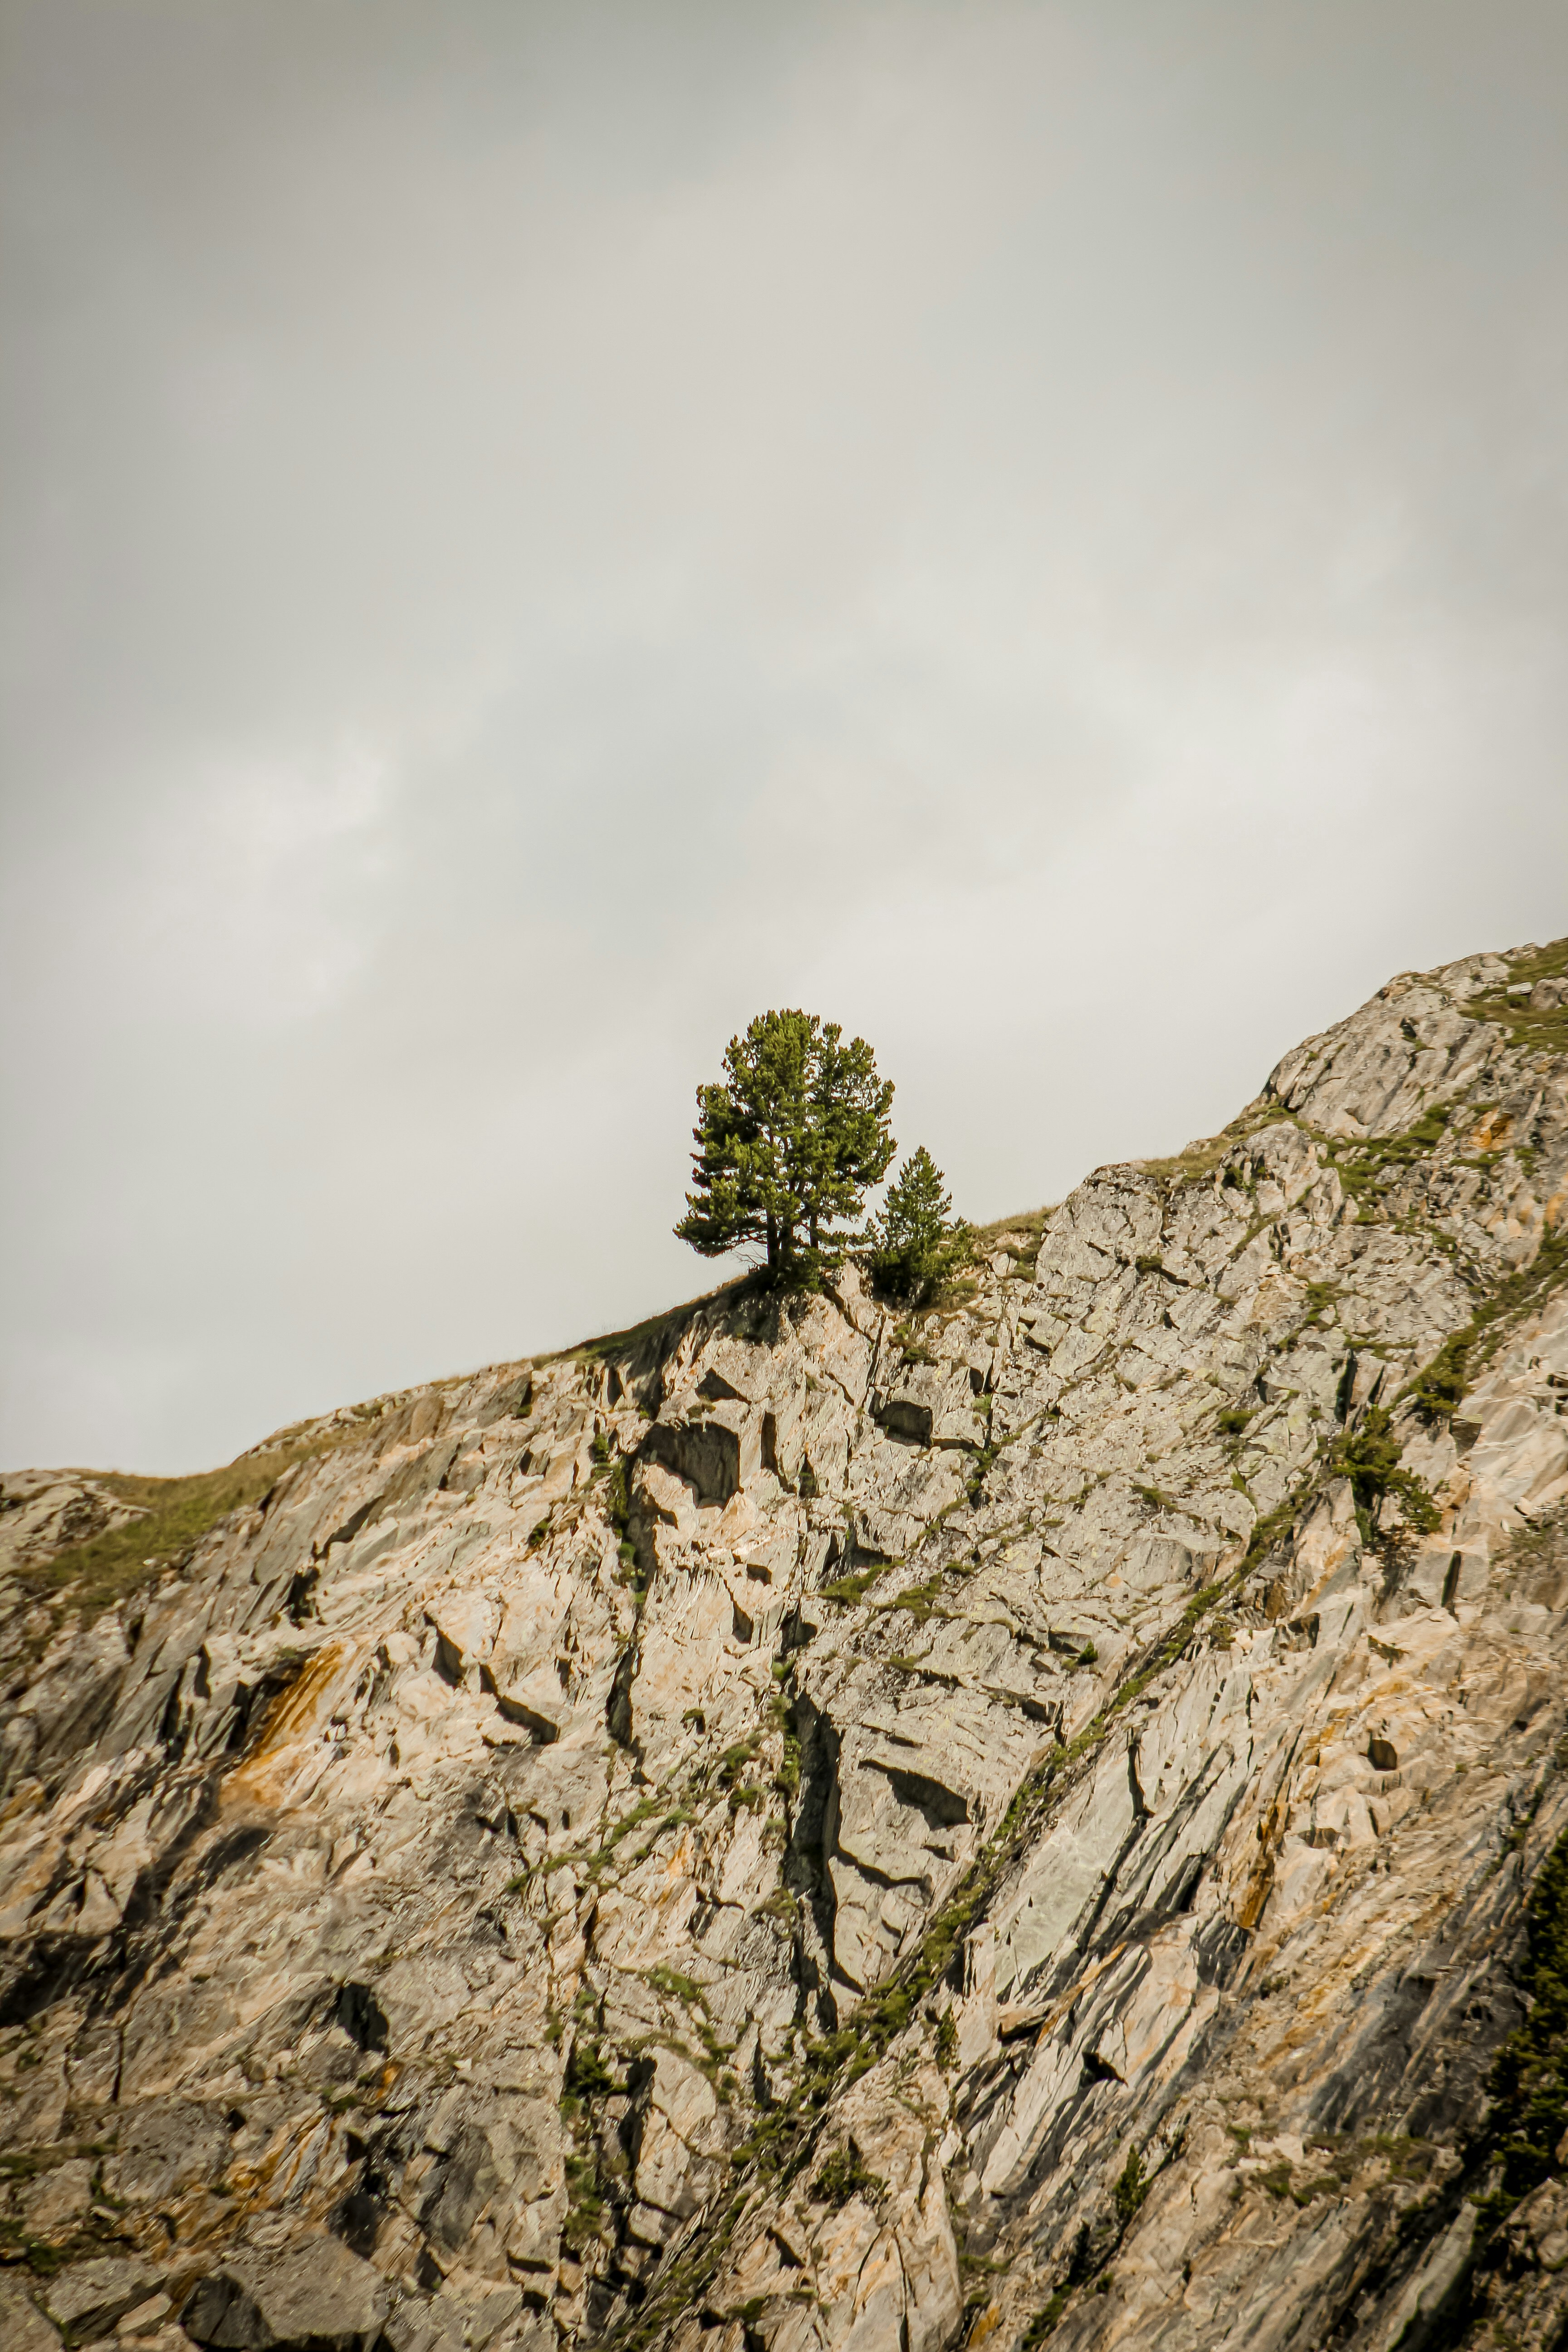 green tree on gray rocky mountain under white cloudy sky during daytime